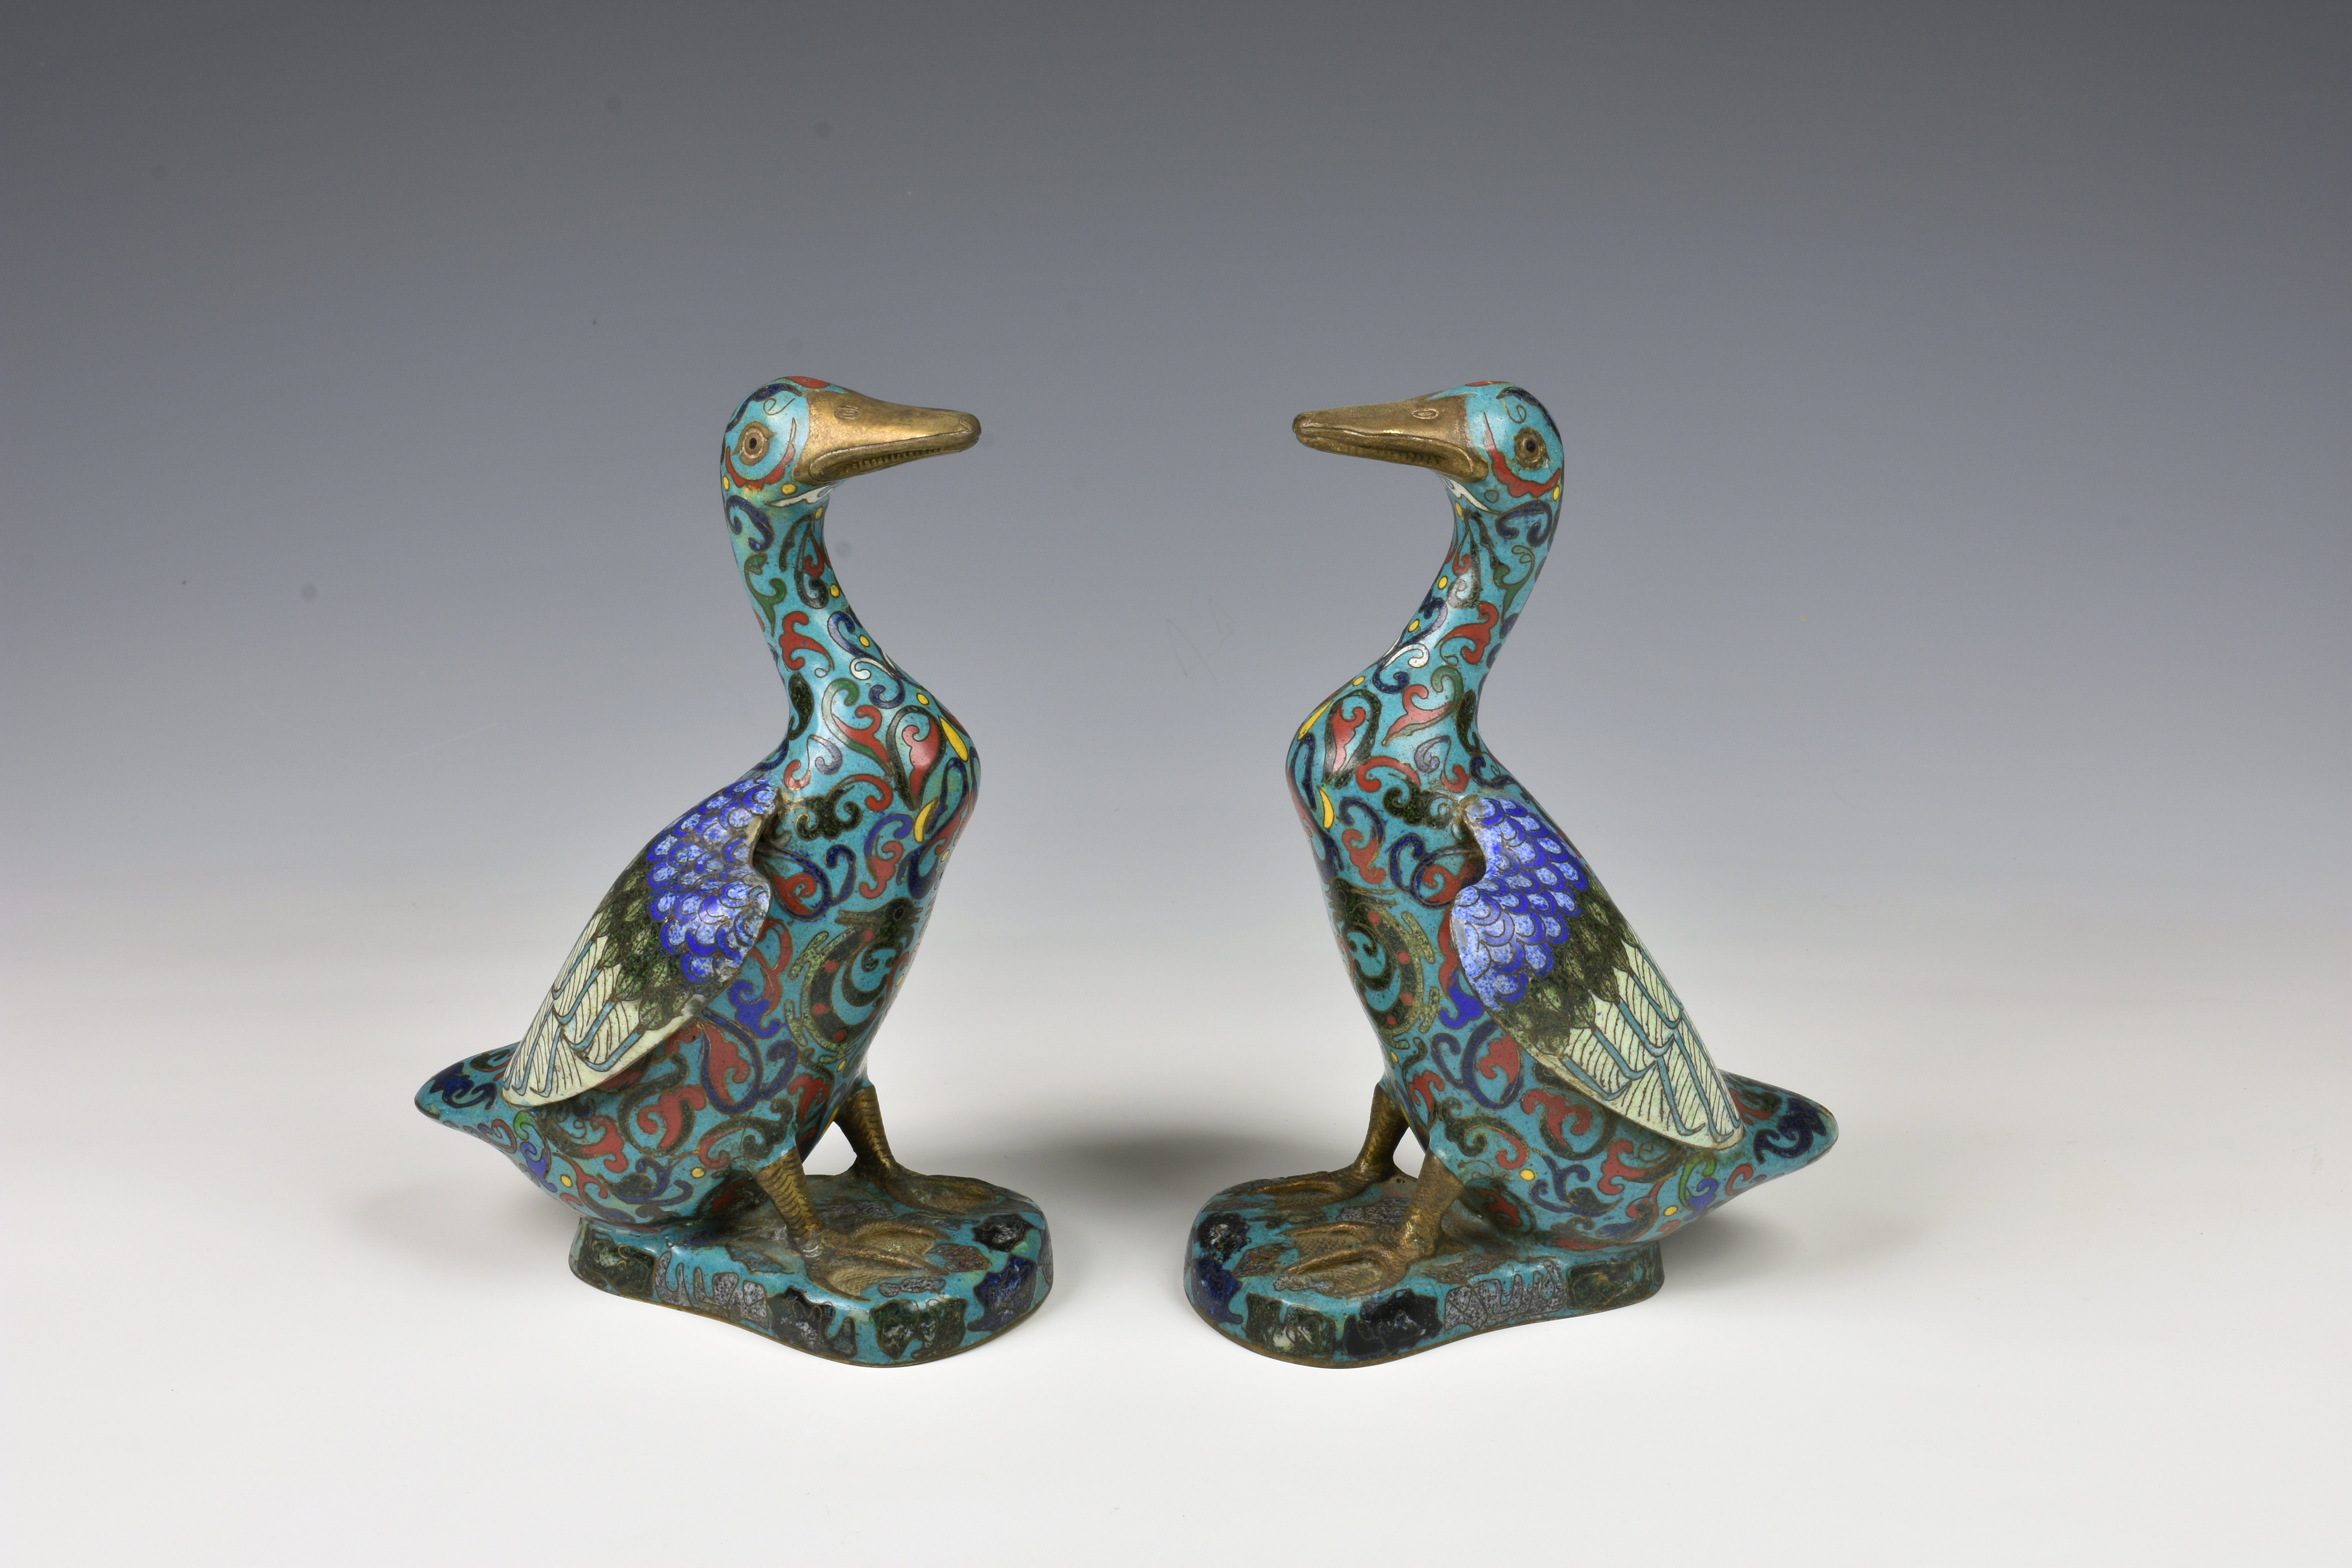 A pair of Chinese cloisonne figures of ducks probably early 20th century, in polychrome enamels on a